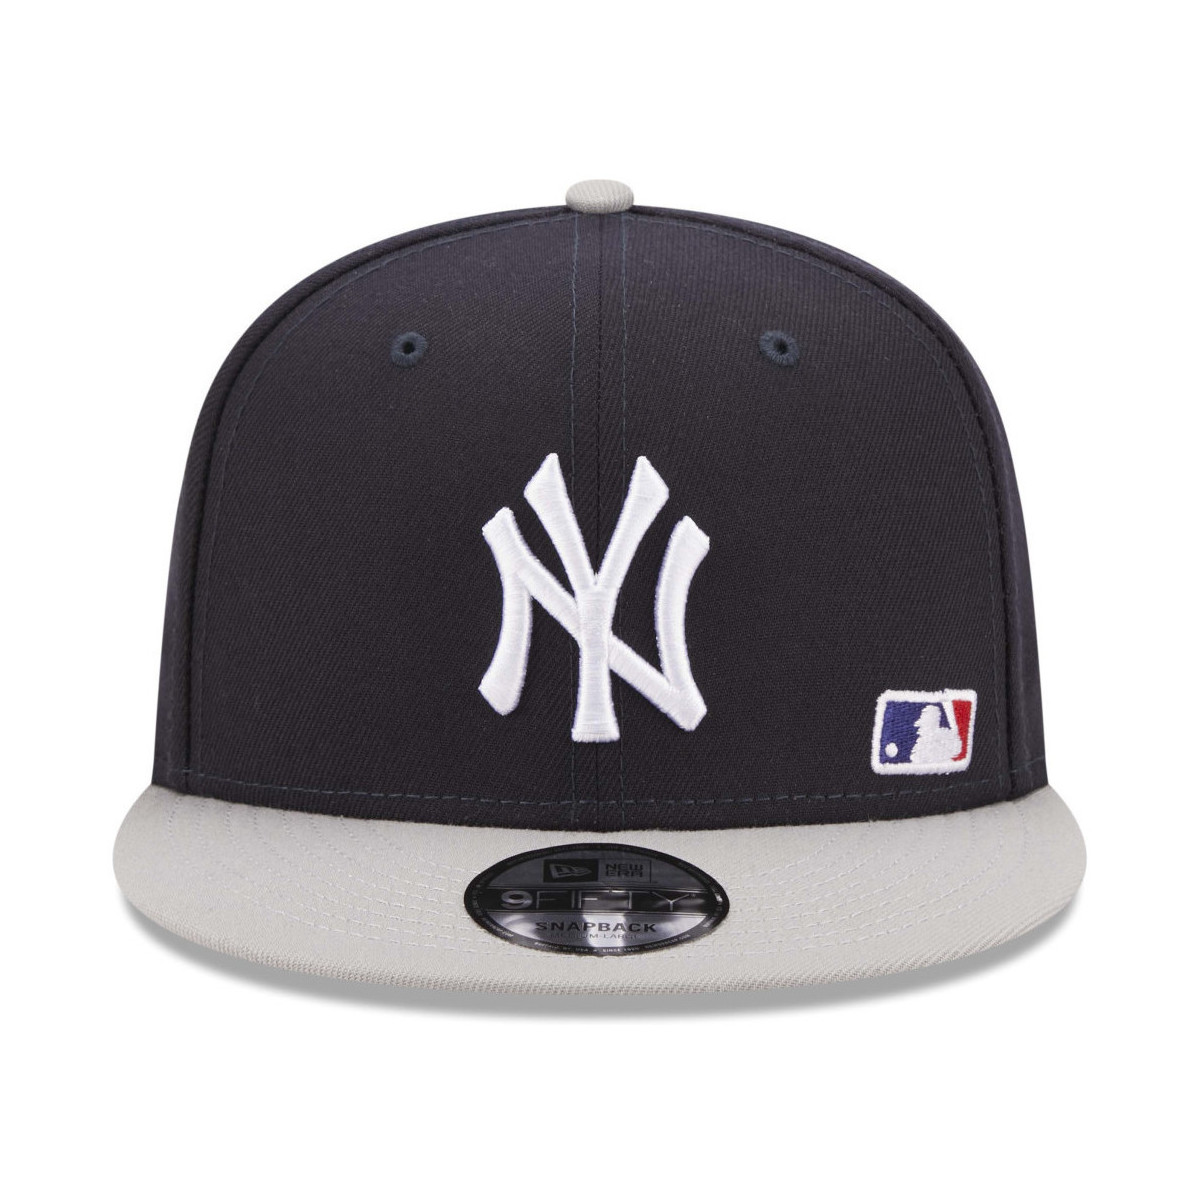 Accessoires textile Casquettes New-Era TEAM ARCH 9FIFTY New Yourk Yankees O Noir